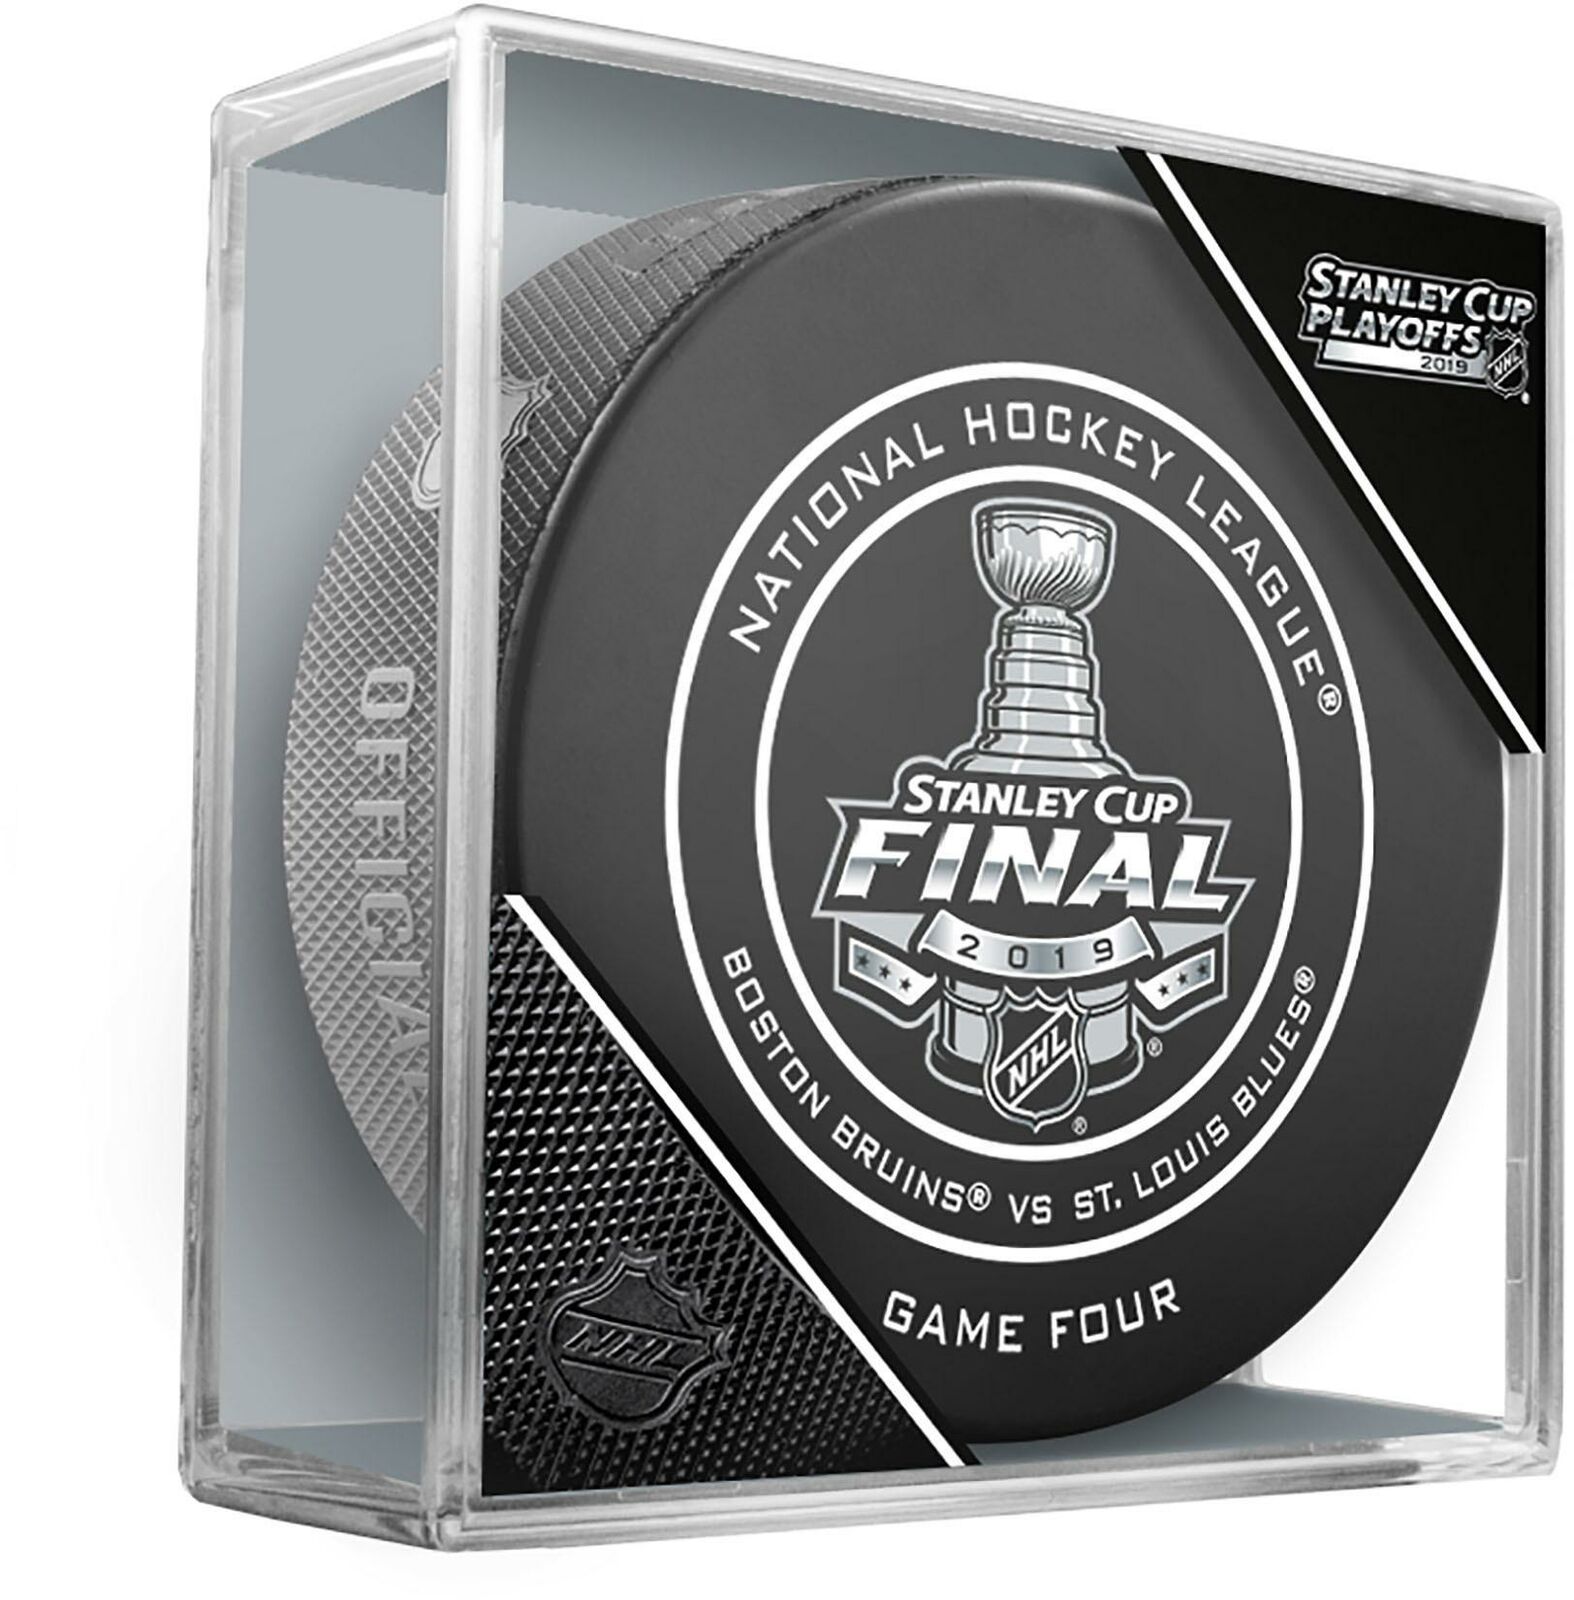 Boston Bruins V St Louis Blues Inglasco 2019 Stanley Cup Final Bound Game 4 Puck